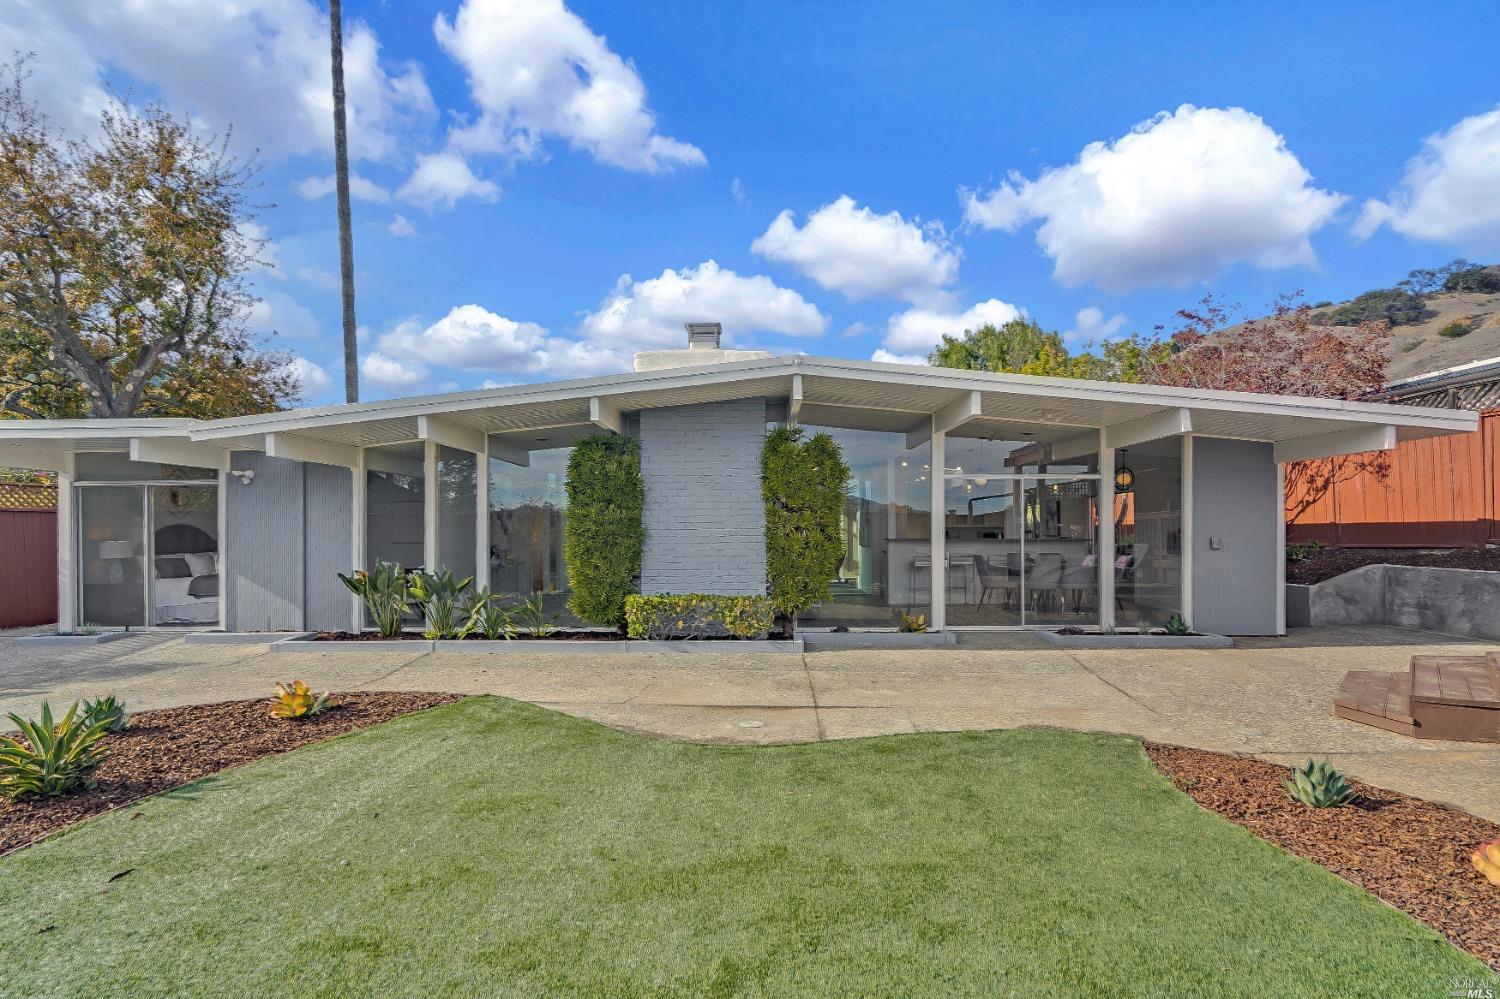 Gorgeous remodeled Eichler in the sought after Miller Creek School District! Eichler enthusiasts must see this home. While most Eichlers only have about 1,700 sq. ft of living space, this truly special Eichler has approx.2,200 sq ft, after converting the light filled atrium into a heated and air conditioned living space, with skylights that open, making this a truly unique and spacious home and a great value for a discerning buyer. New electrical, plumbing, lights, appliances, sink, flooring, baseboards, trim, paint in kitchen area plus new kitchen cabinets with Kovastone quartz counters. New tiles, fixtures, lights, vanities, quartz countertops, electrical and plumbing in bathrooms. New shower enclosure in primary bath. New luxury vinyl flooring throughout the house, the insulated foam roof has recently been recoated and the interior and exterior are freshly painted. Two enclosed garage spaces with new epoxy floors and lots of storage. Convenient to hiking and biking trails, plus all the amenities that Terra Linda has to offer including Santa Margarita Park and the Terra Linda Community Center and Pool. This is truly the Eichler you've been waiting for!